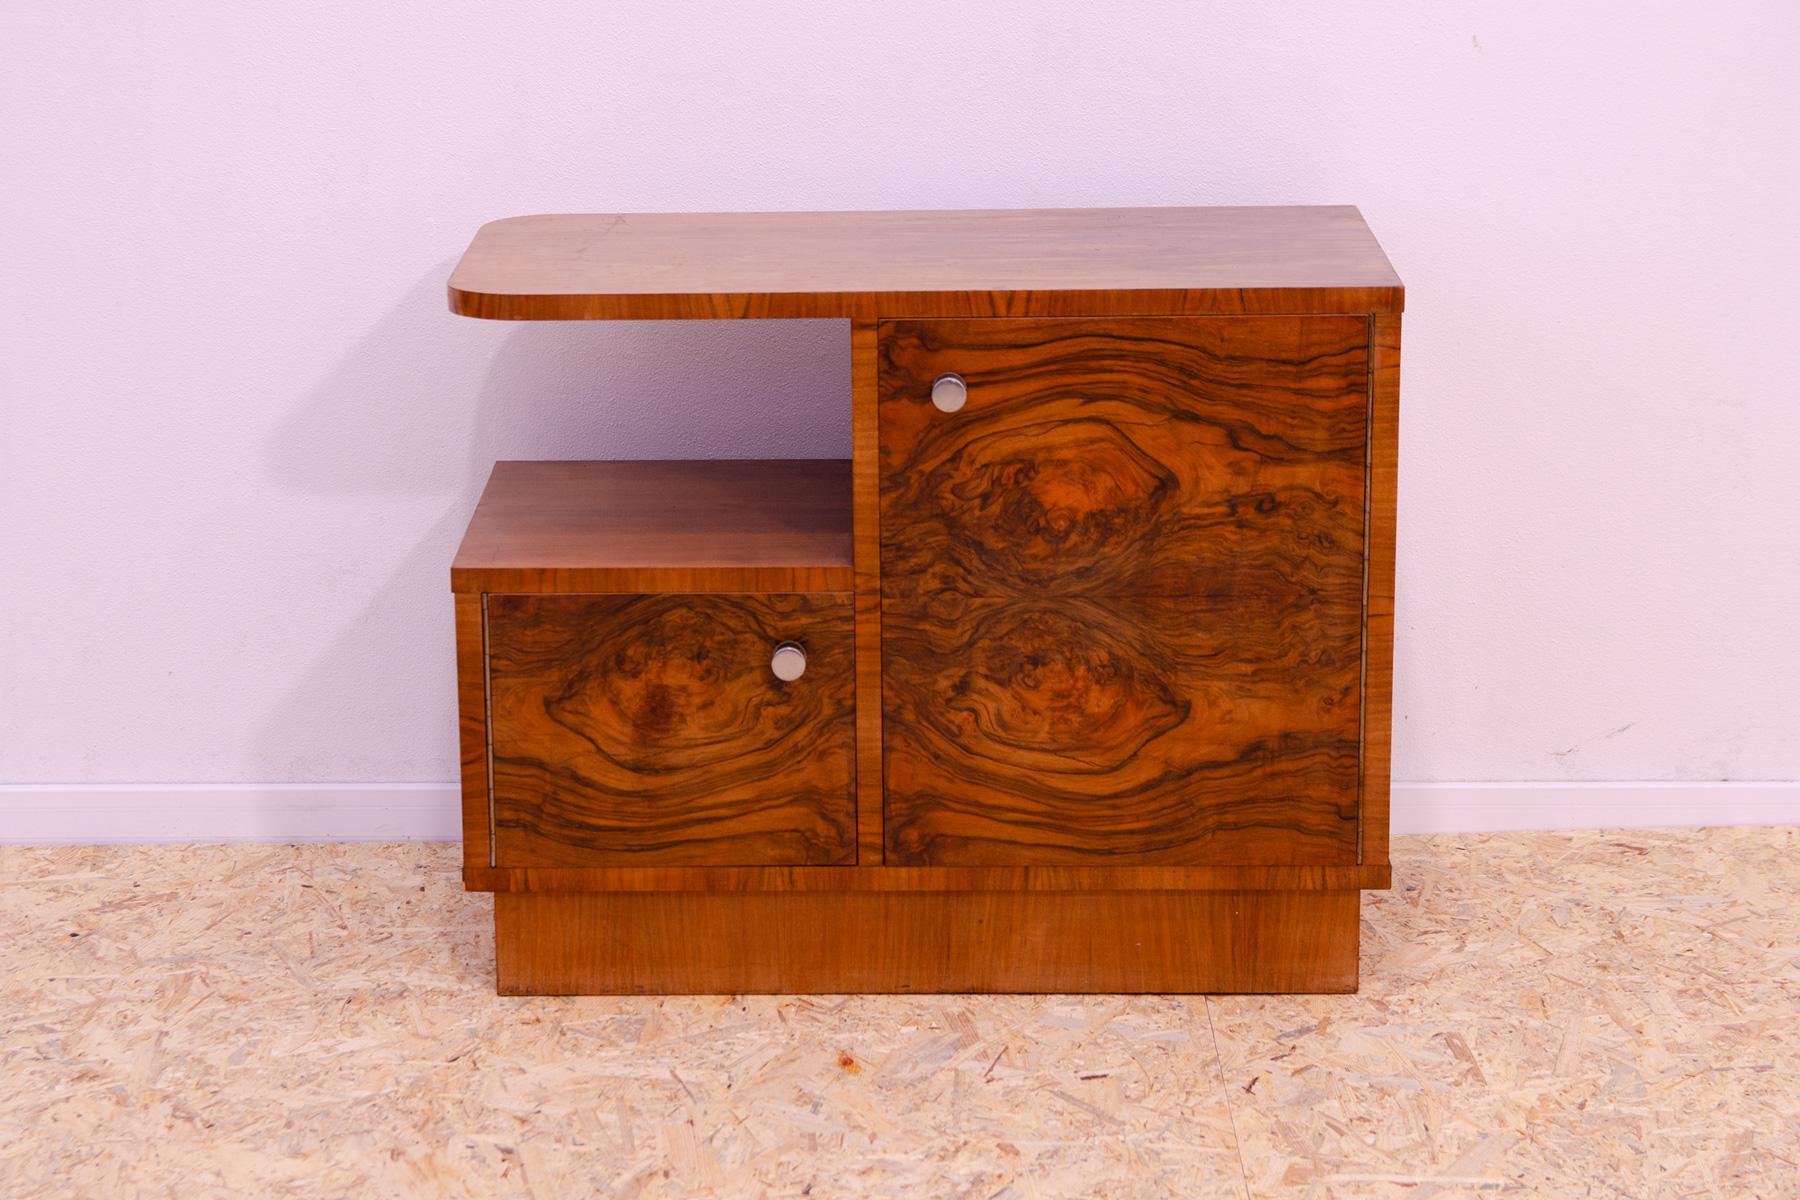 This midcentury ART DECO bar or sideboard was made in the 1930´s in the former Czechoslovakia.

It´s charakterized a very simple and practical design.
It´s a beautiful example of Central European ART DECO furniture design. It´s in good preserved